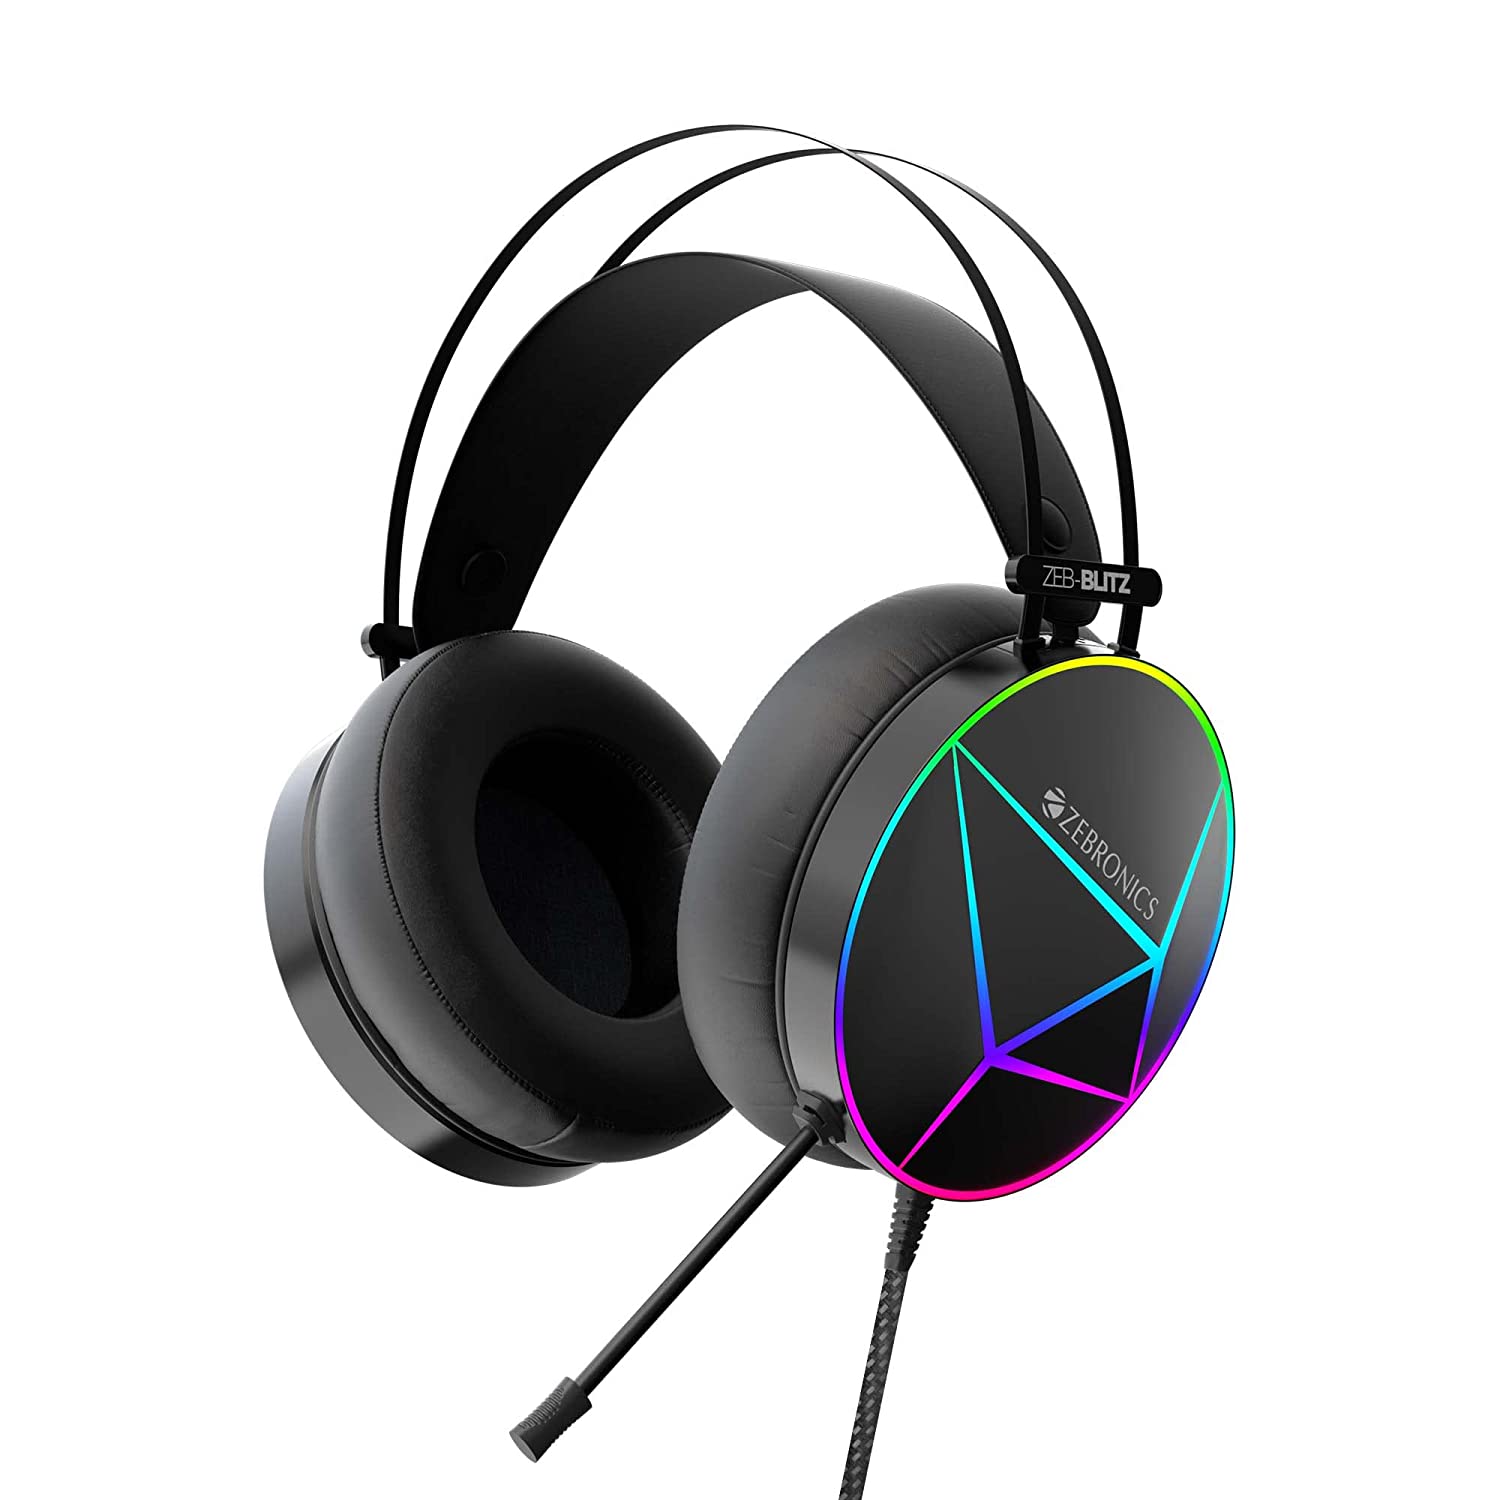 ZEBRONICS Zeb-Blitz USB Gaming Headphone with Dolby Atmos, RGB LED, Windows Software, Simulated 7.1 Surround Sound, 2.4 Meter Braided Cable, Flexible mic, Padded Headband and Ear Cushions